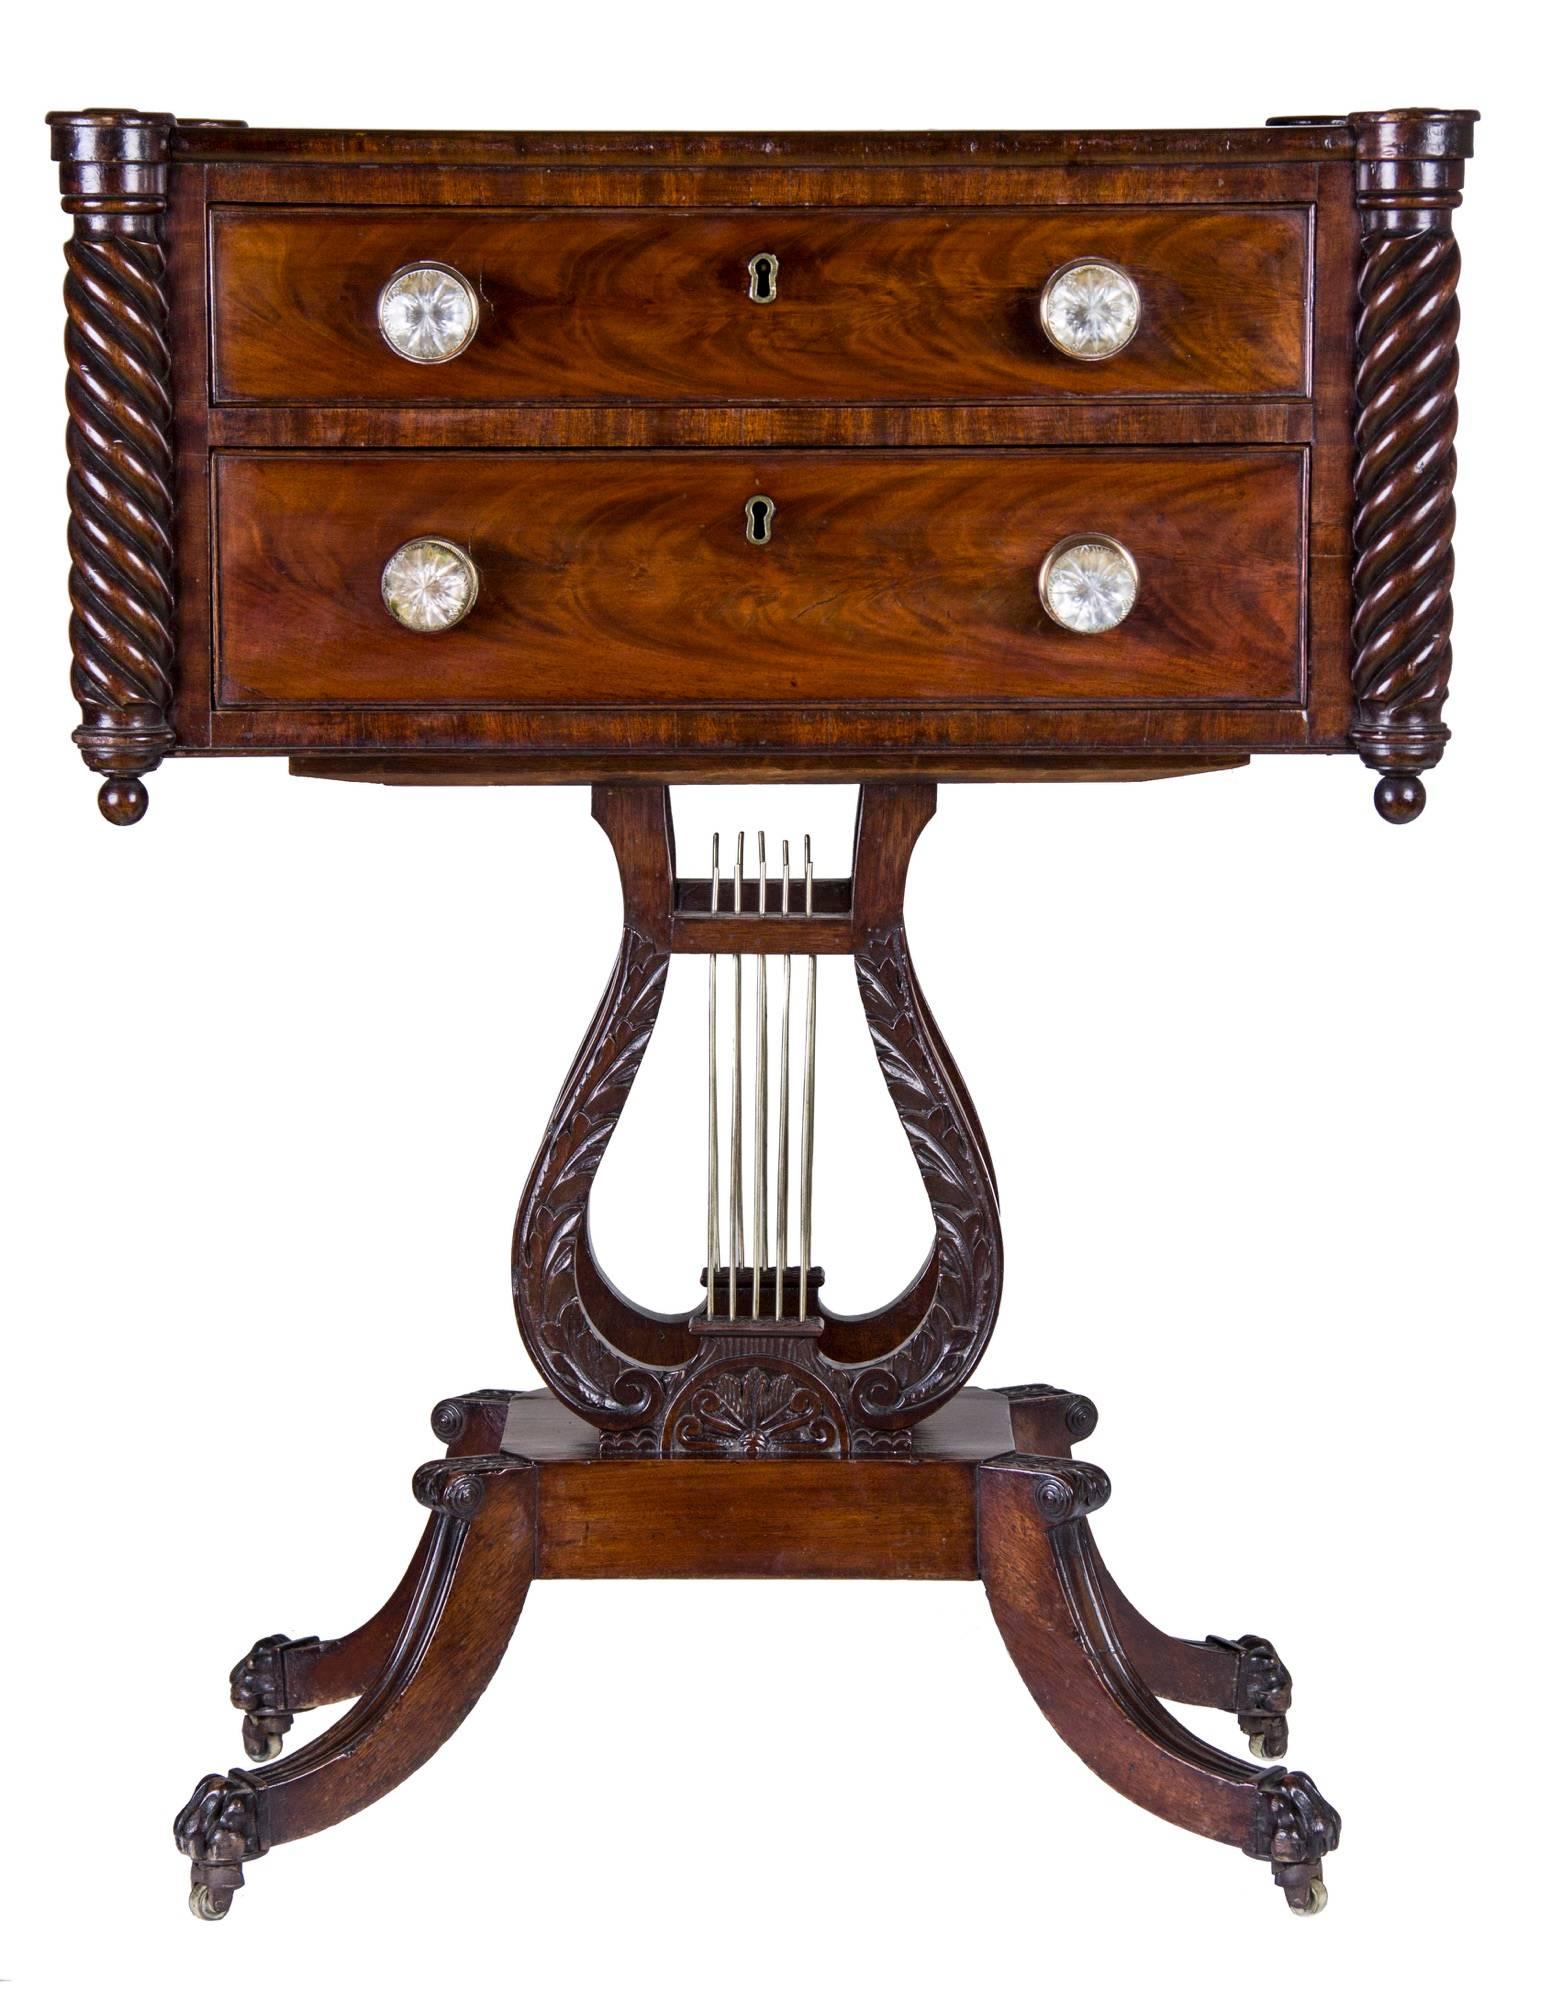 This worktable relates to a group of lyre work tables produced primarily in Philadelphia. One documented example retains its maker’s label, but other shops may or may not have reinterpreted the model. The primary research on this form was conducted